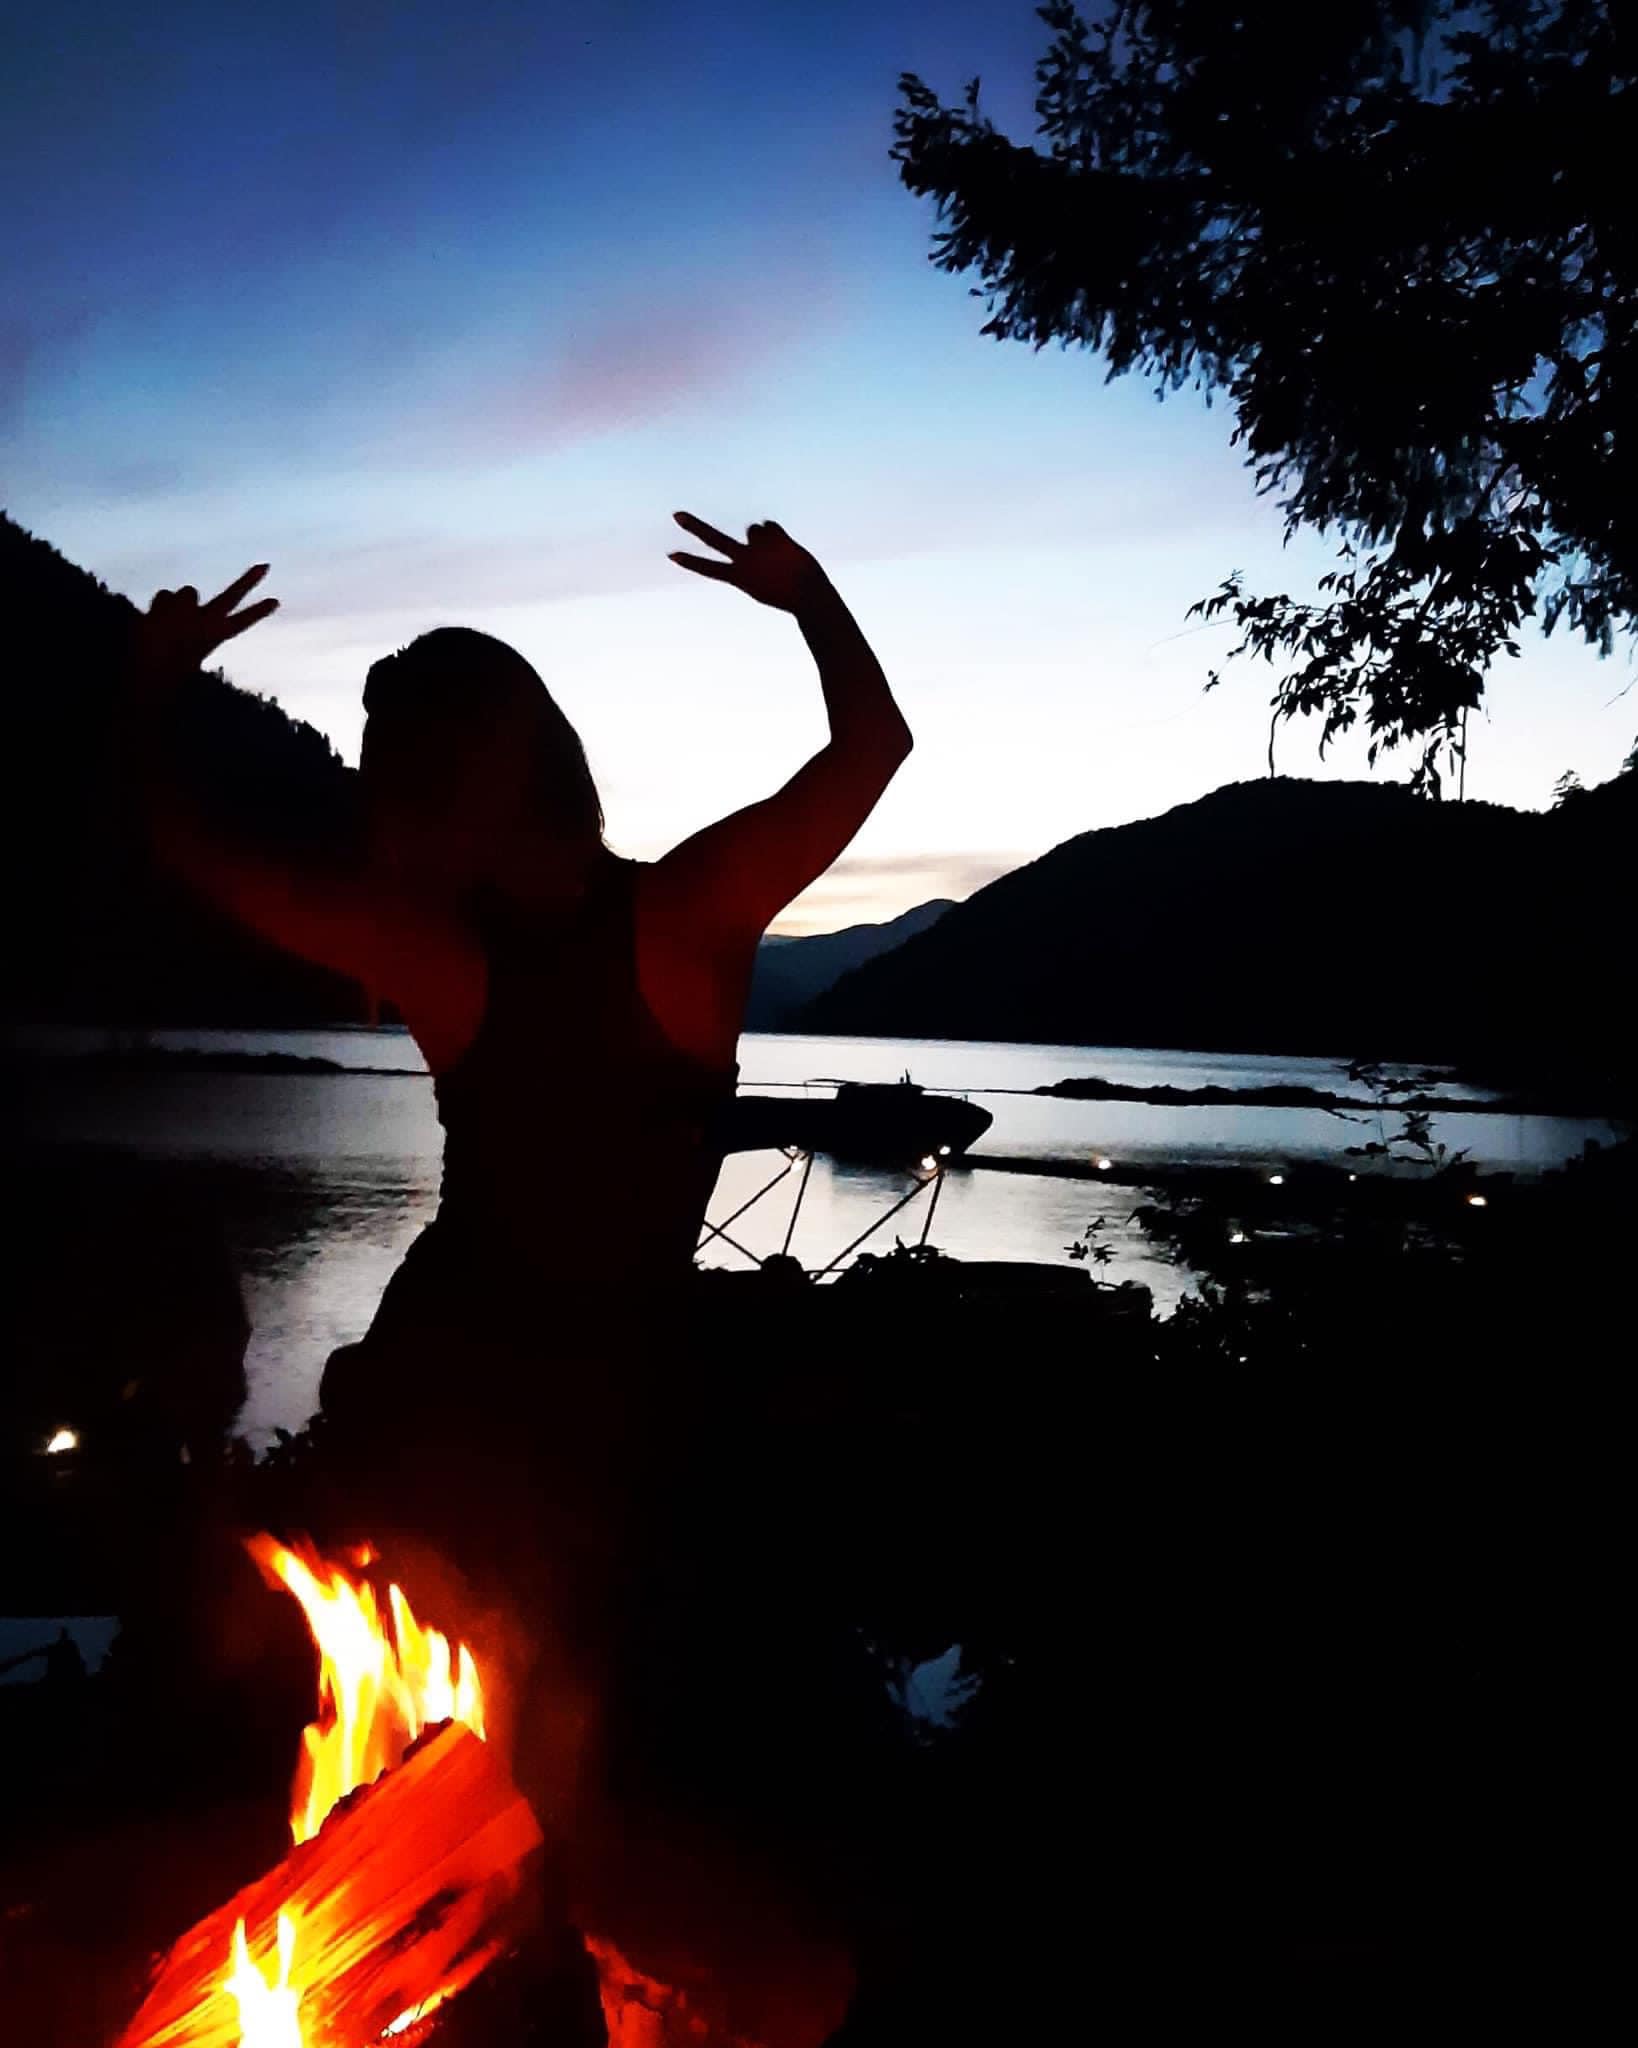 A silhouette of a woman holding up her arms behind a campfire with a lake and darkening sky in the background